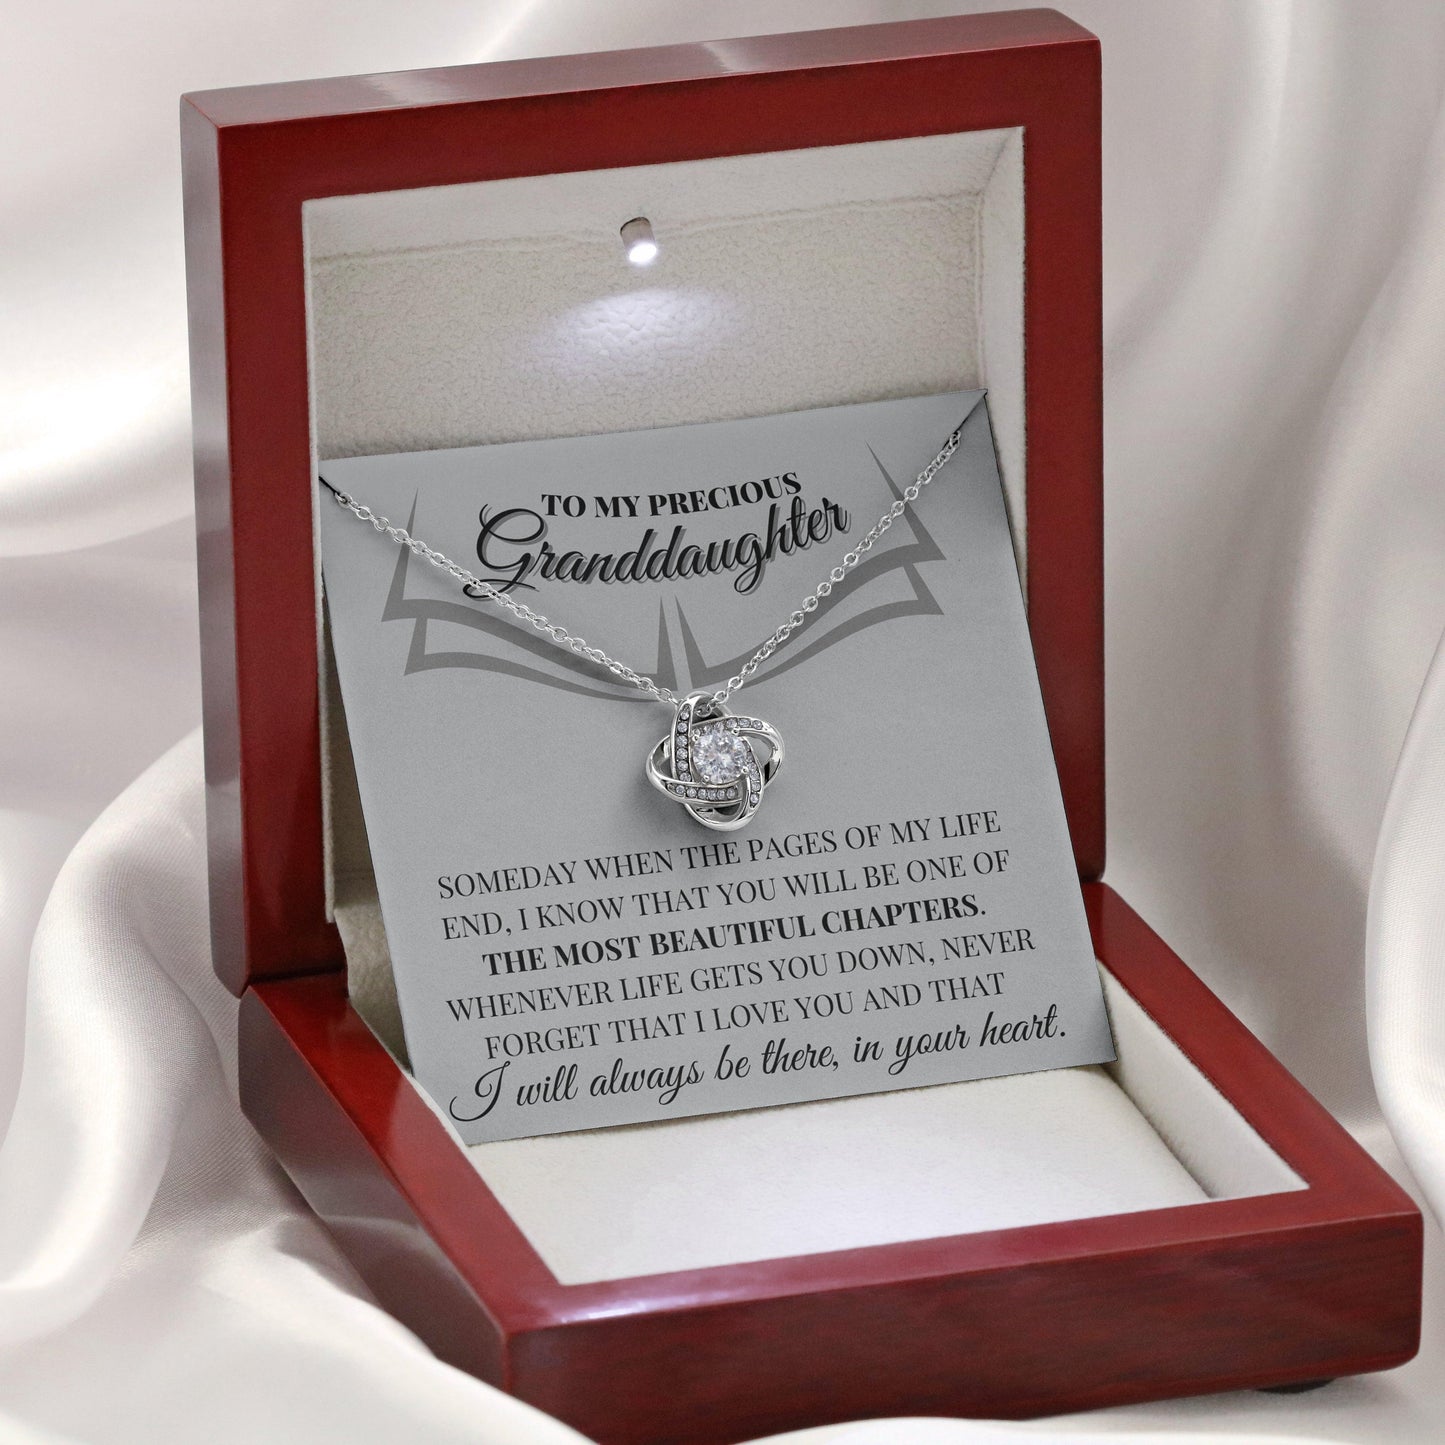 Jewelry gifts Granddaughter - Precious - Necklace - Belesmé - Memorable Jewelry Gifts